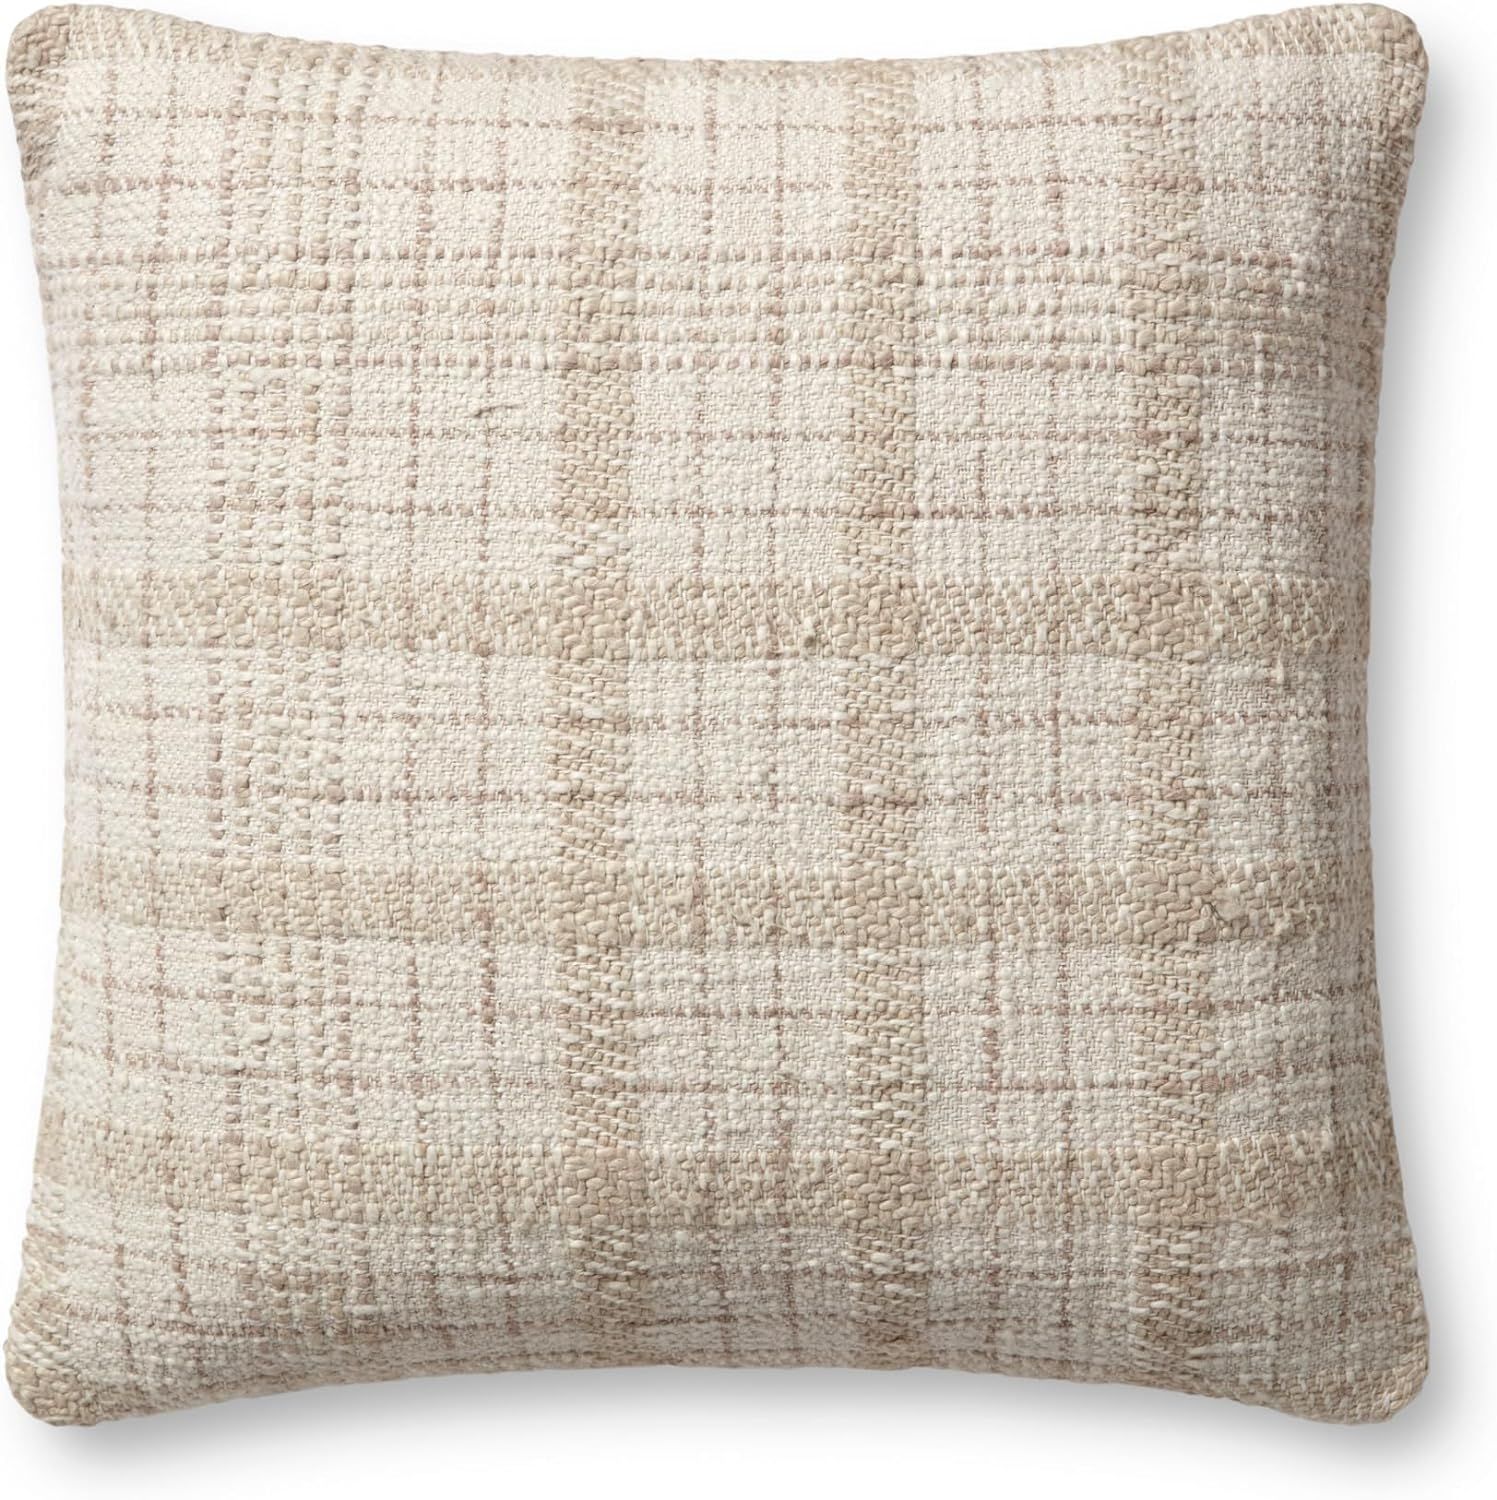 Loloi Fern Pillow, 18x18 Cover Only, Ivory/Beige | Amazon (US)